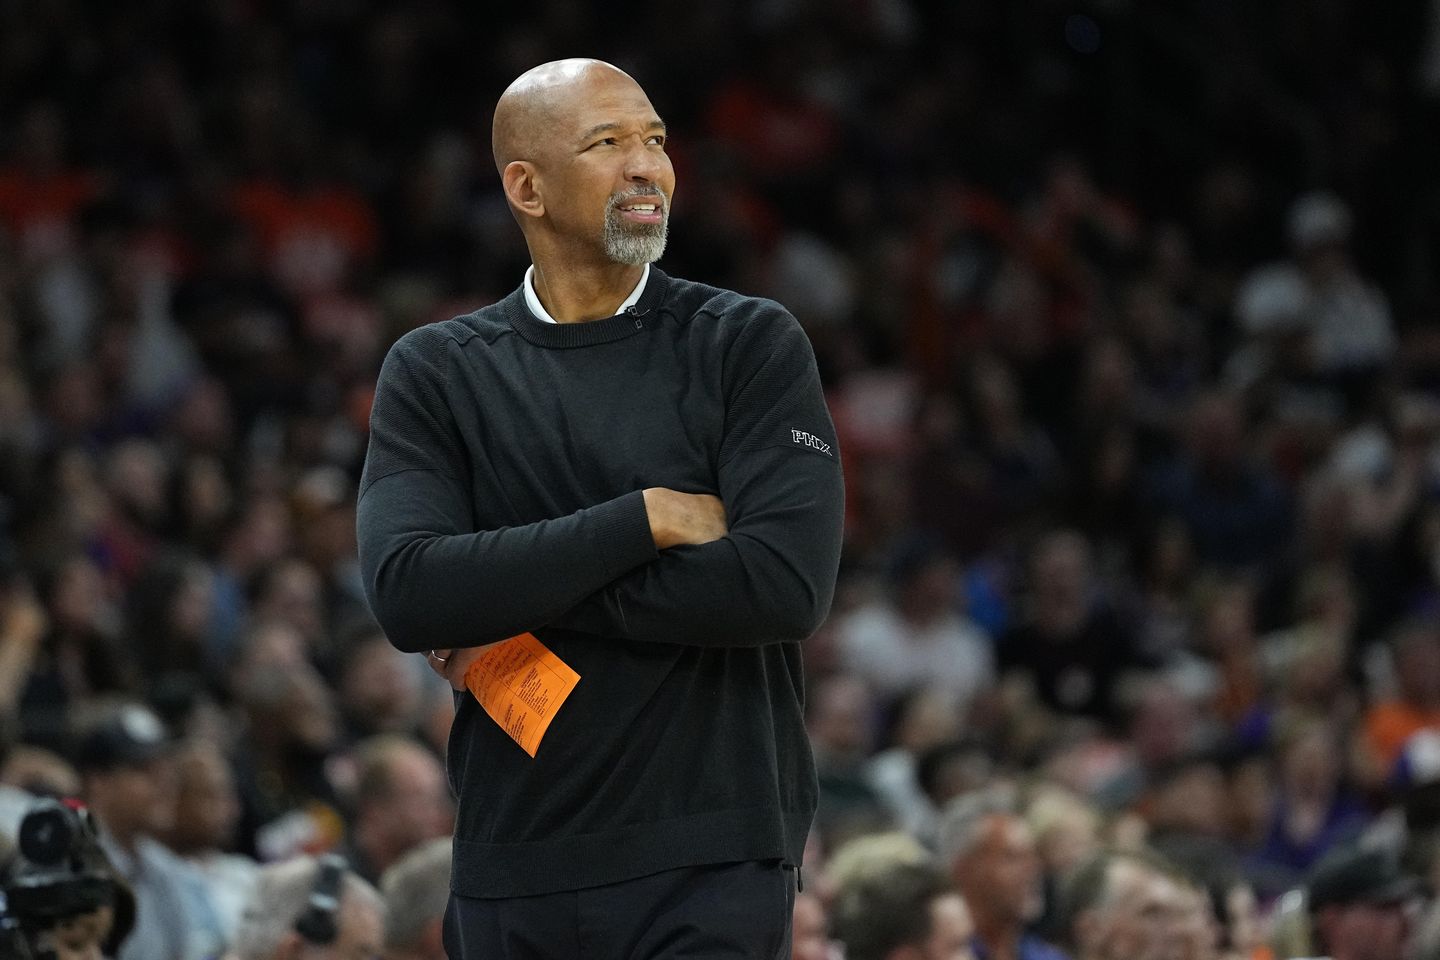 Pistons reach agreement to hire former Suns coach Monty Williams, sources say